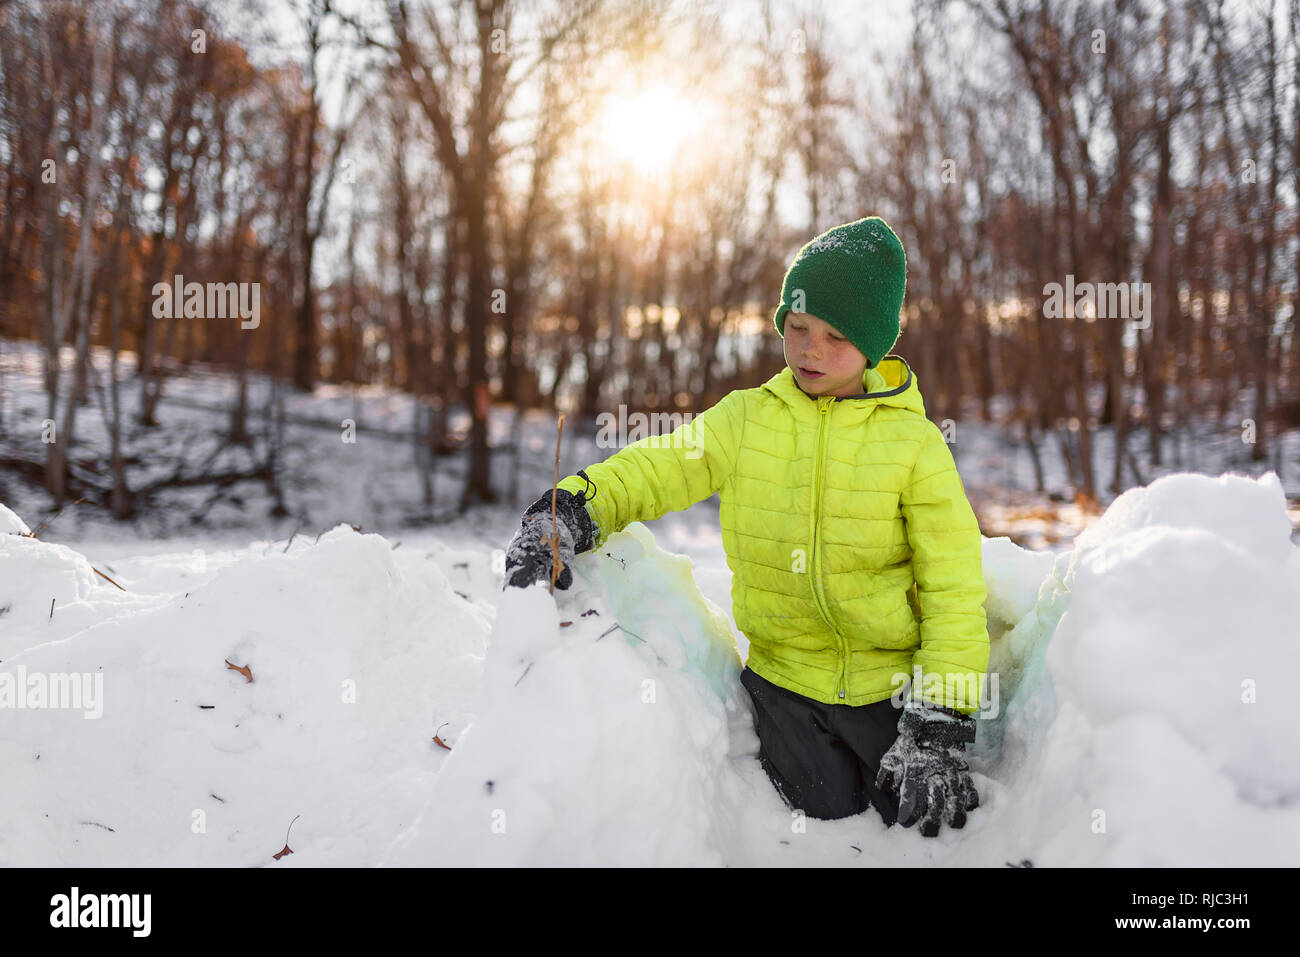 Boy building a snow fort, United States Stock Photo